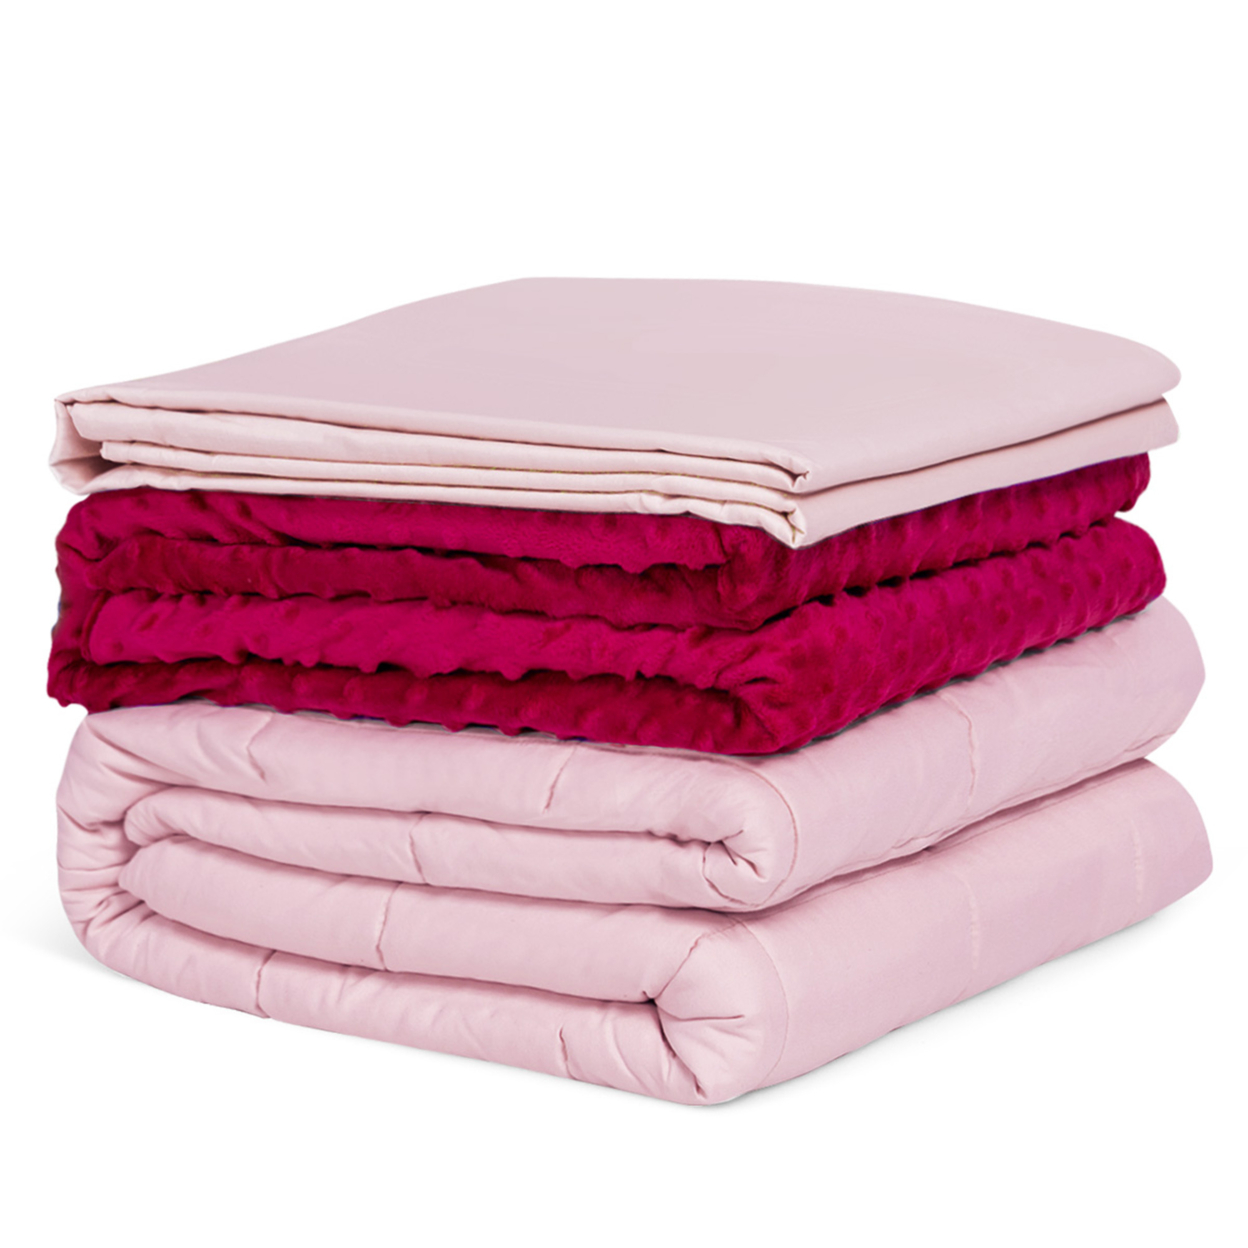 25lbs Heavy Weighted Blanket 3 Piece Set W/Hot & Cold Duvet Covers 60''x80'' Pink